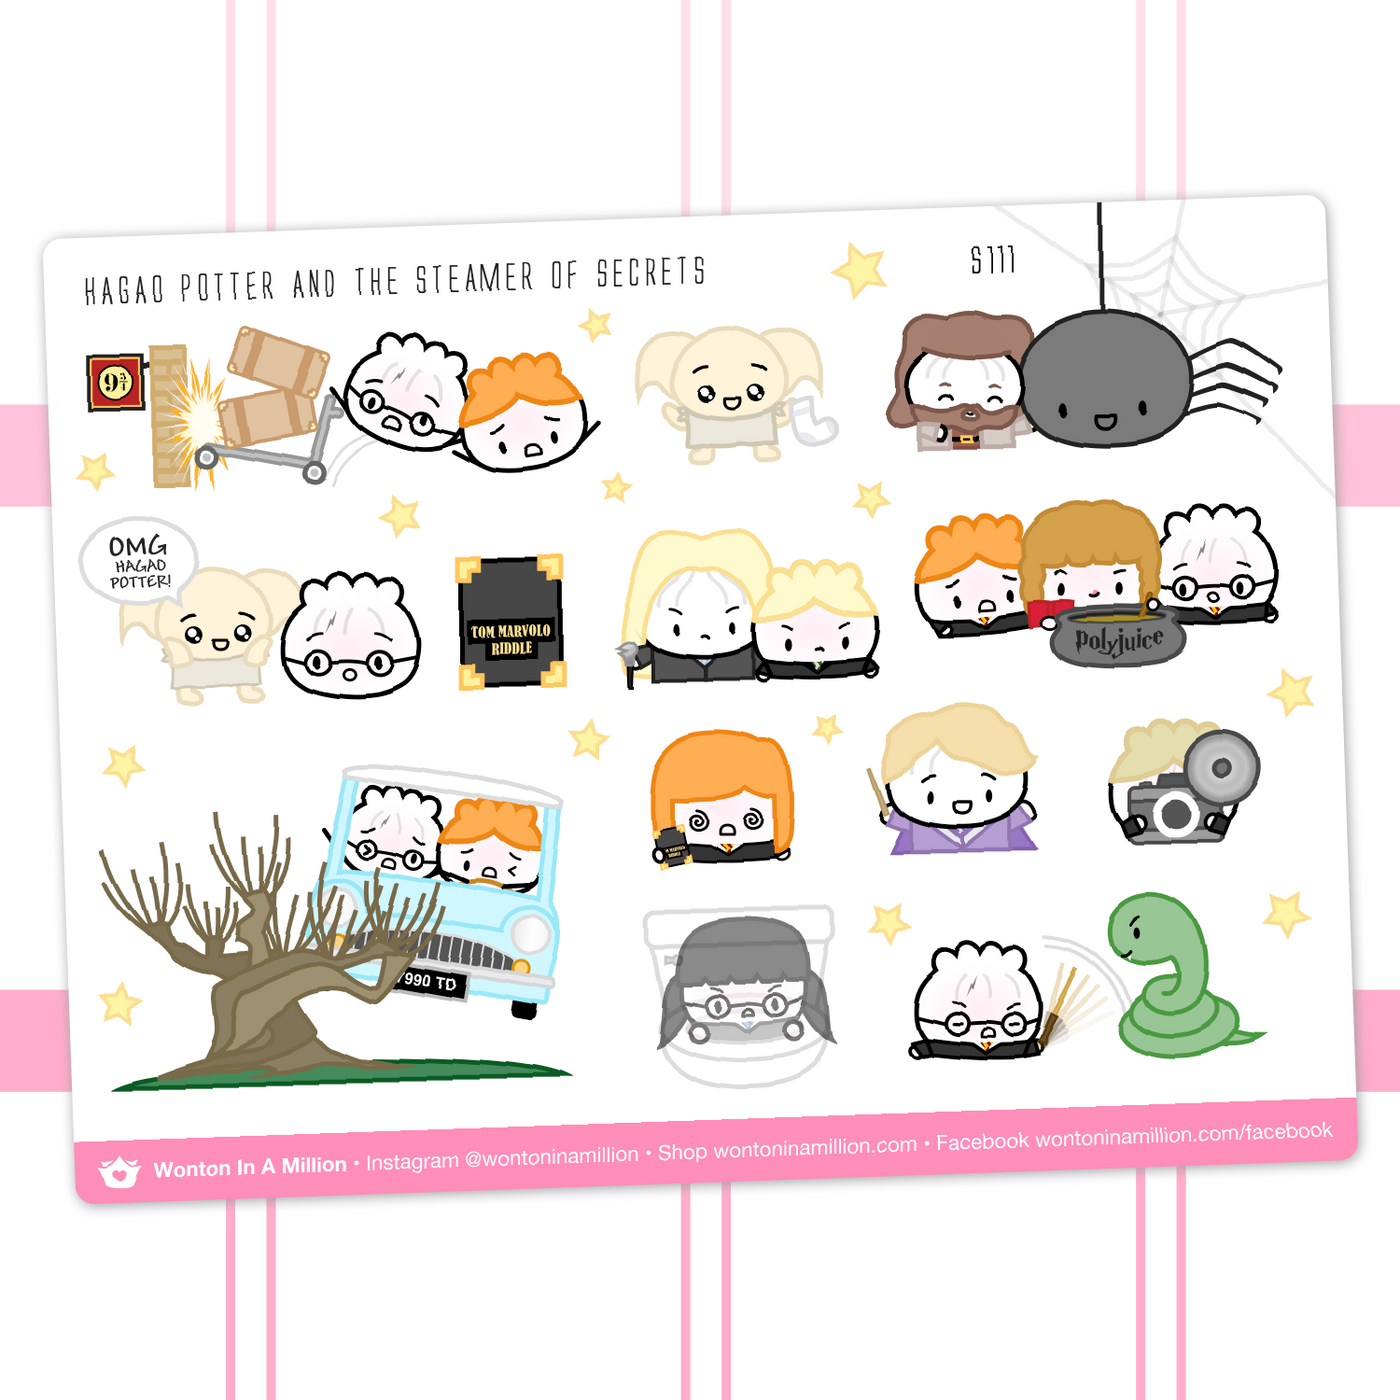 S111 | Hagao Potter [Book 2] - "The Steamer Of Secrets" Stickers